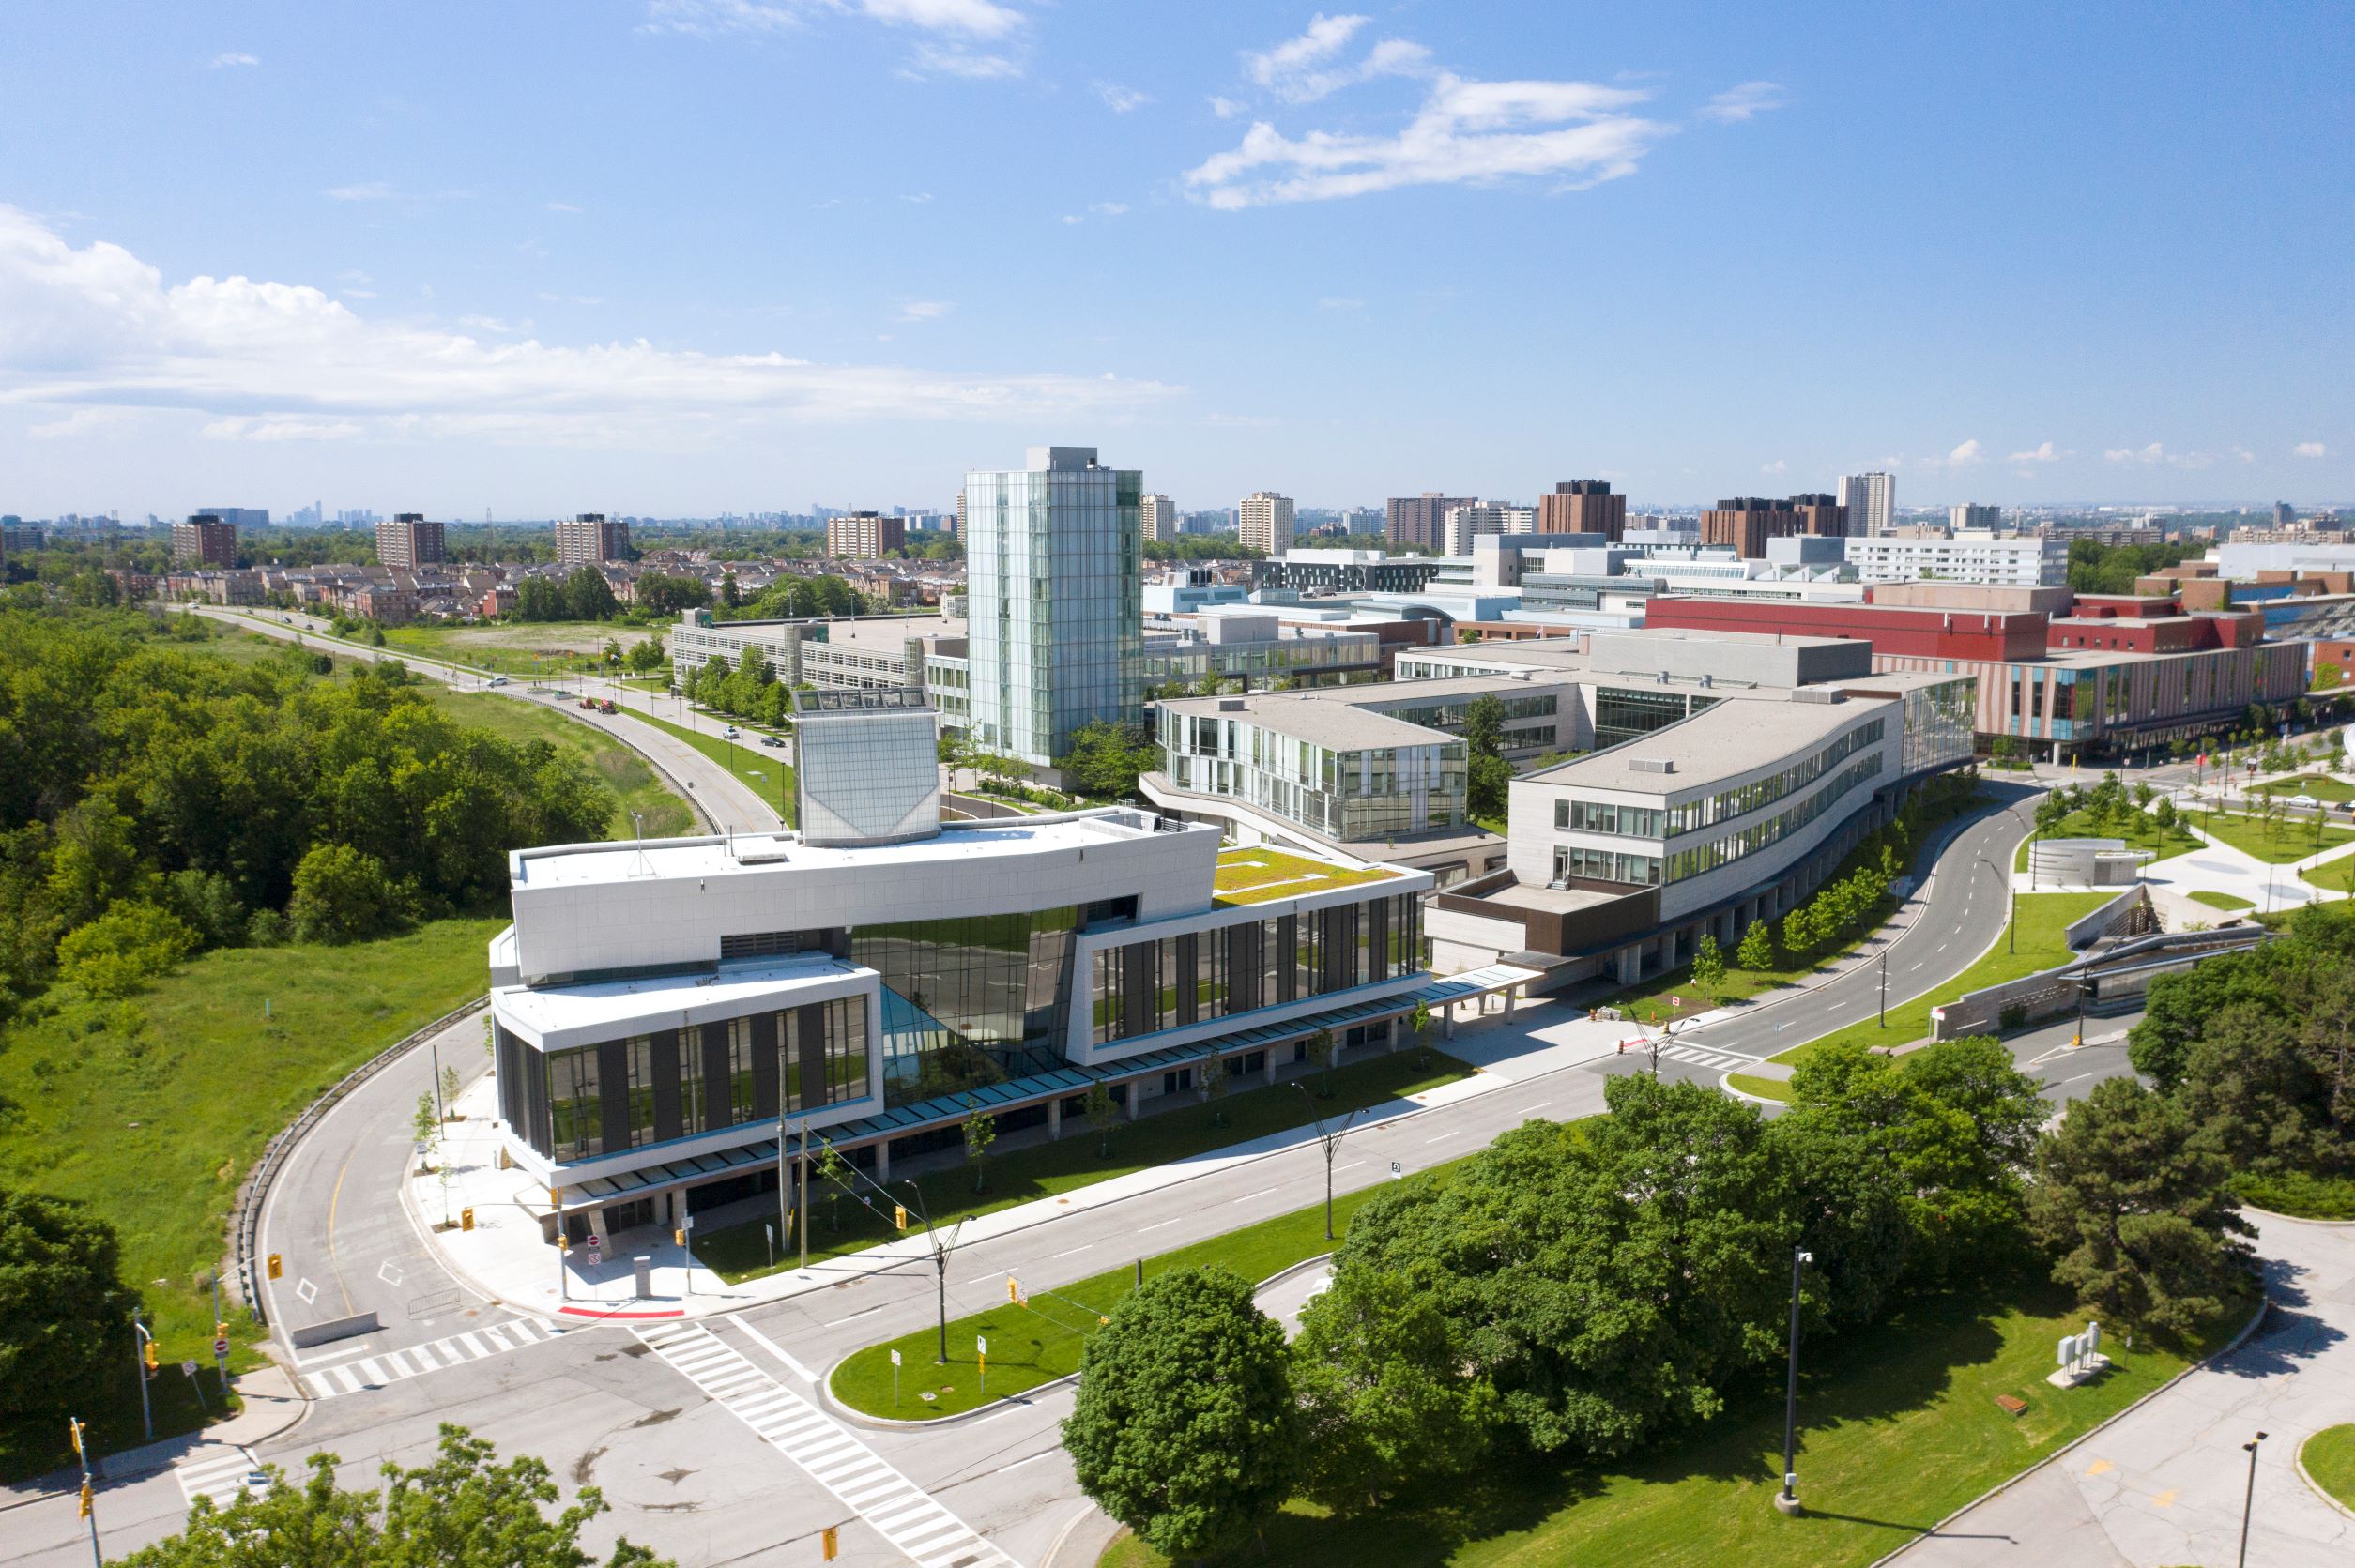 Aerial view of academic buildings and green trees at the southeast corner of York University's Keele Campus